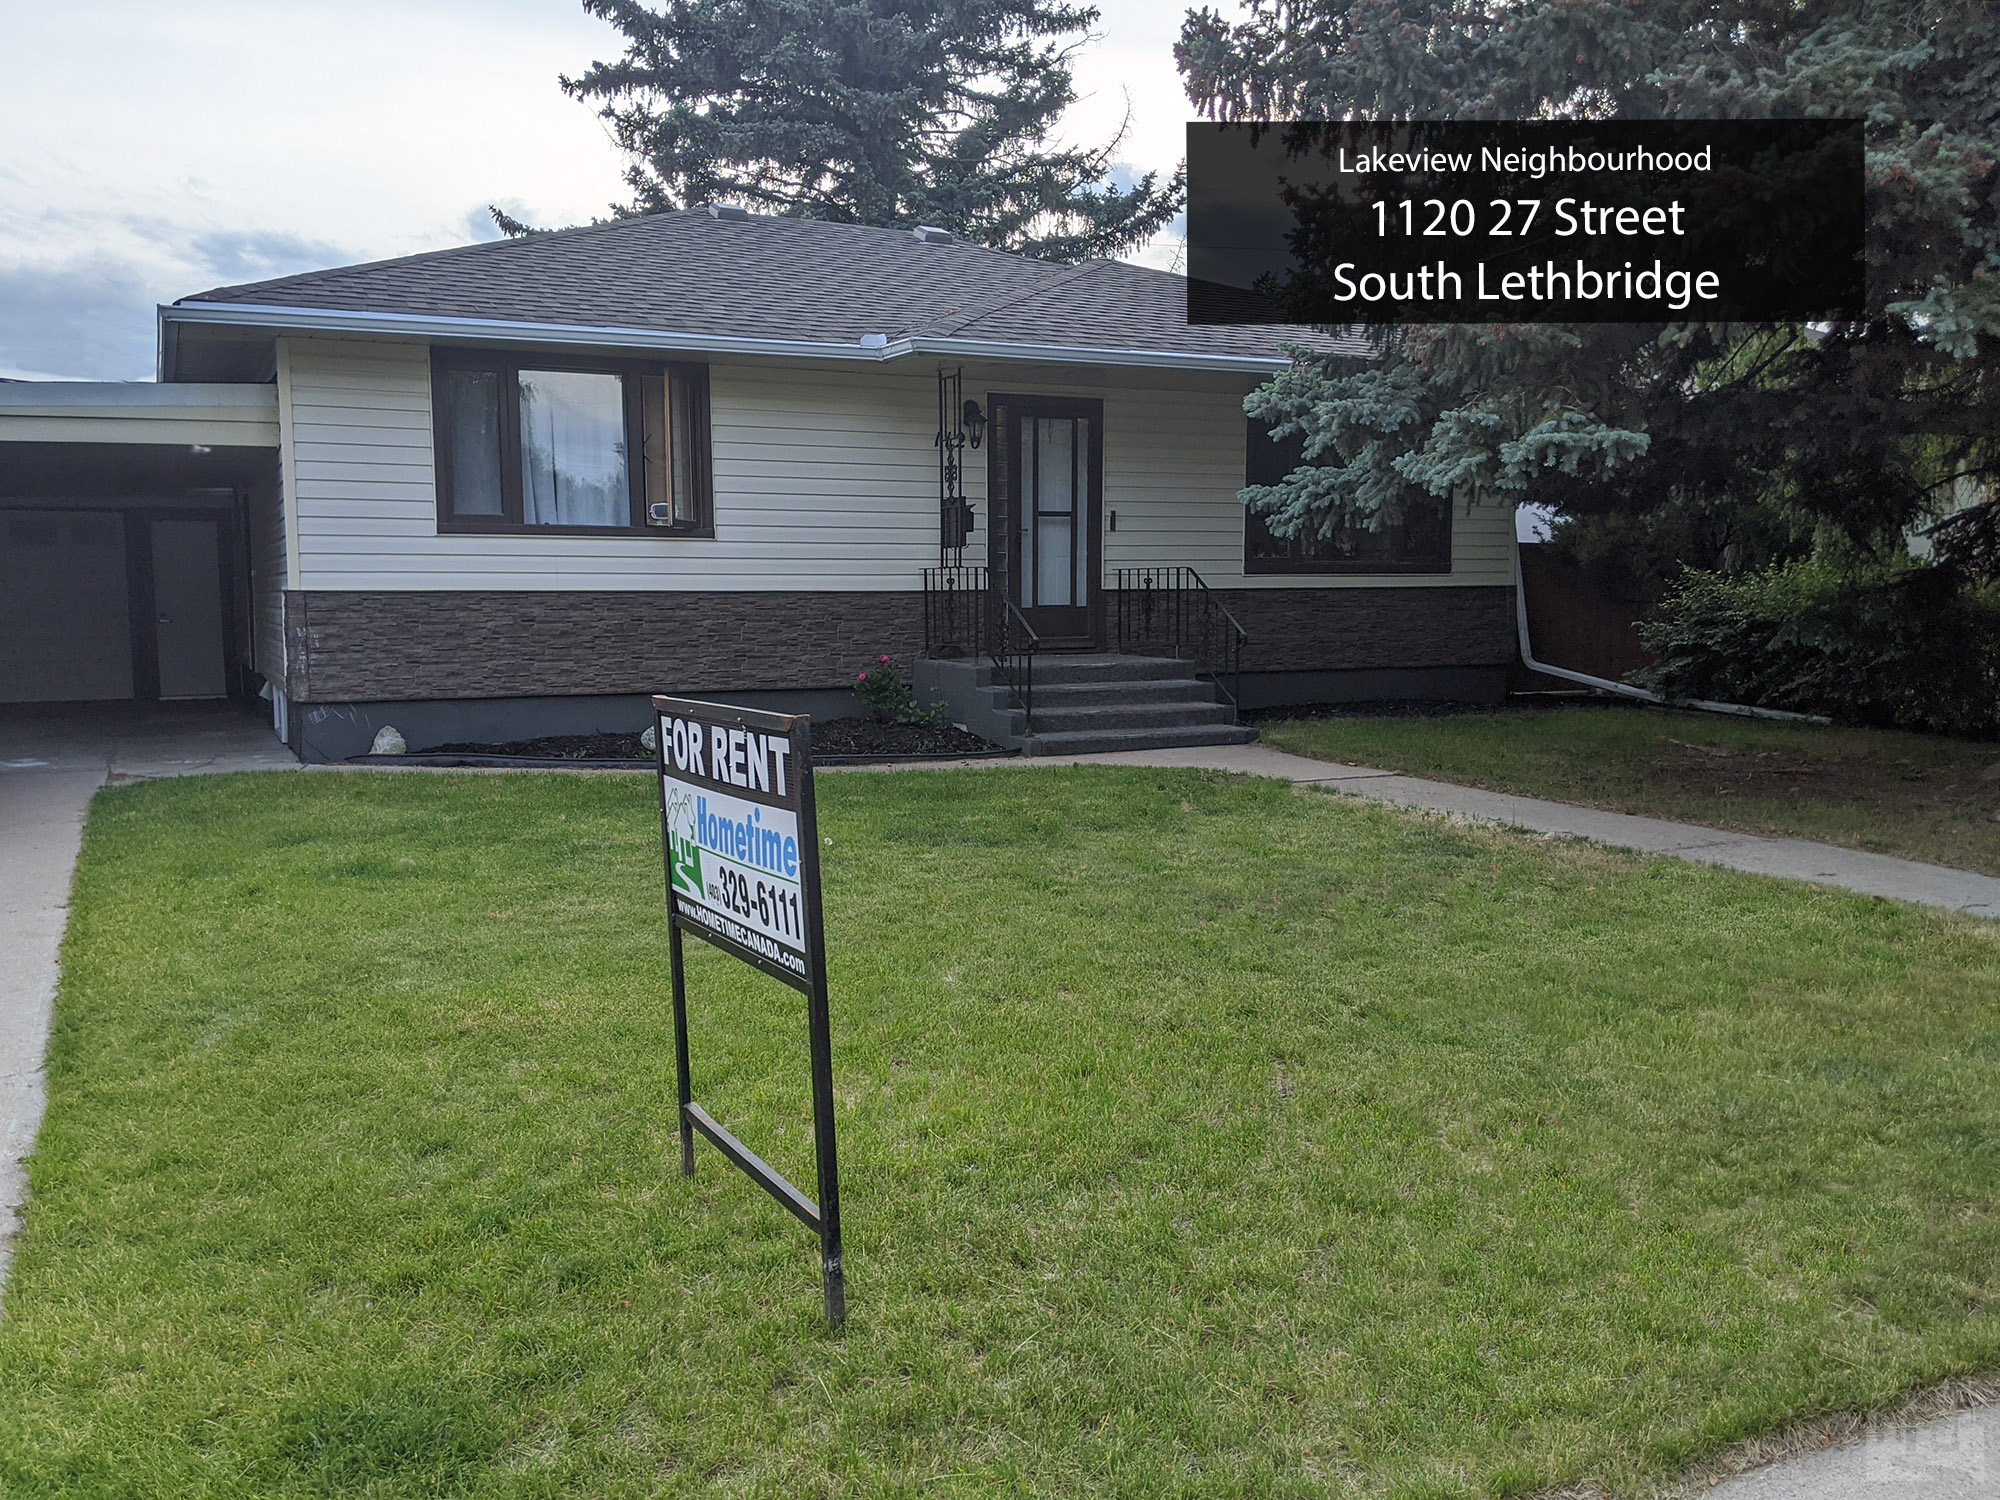 1120 27 Street South Lethbridge (Mainfloor Suite) Cover image